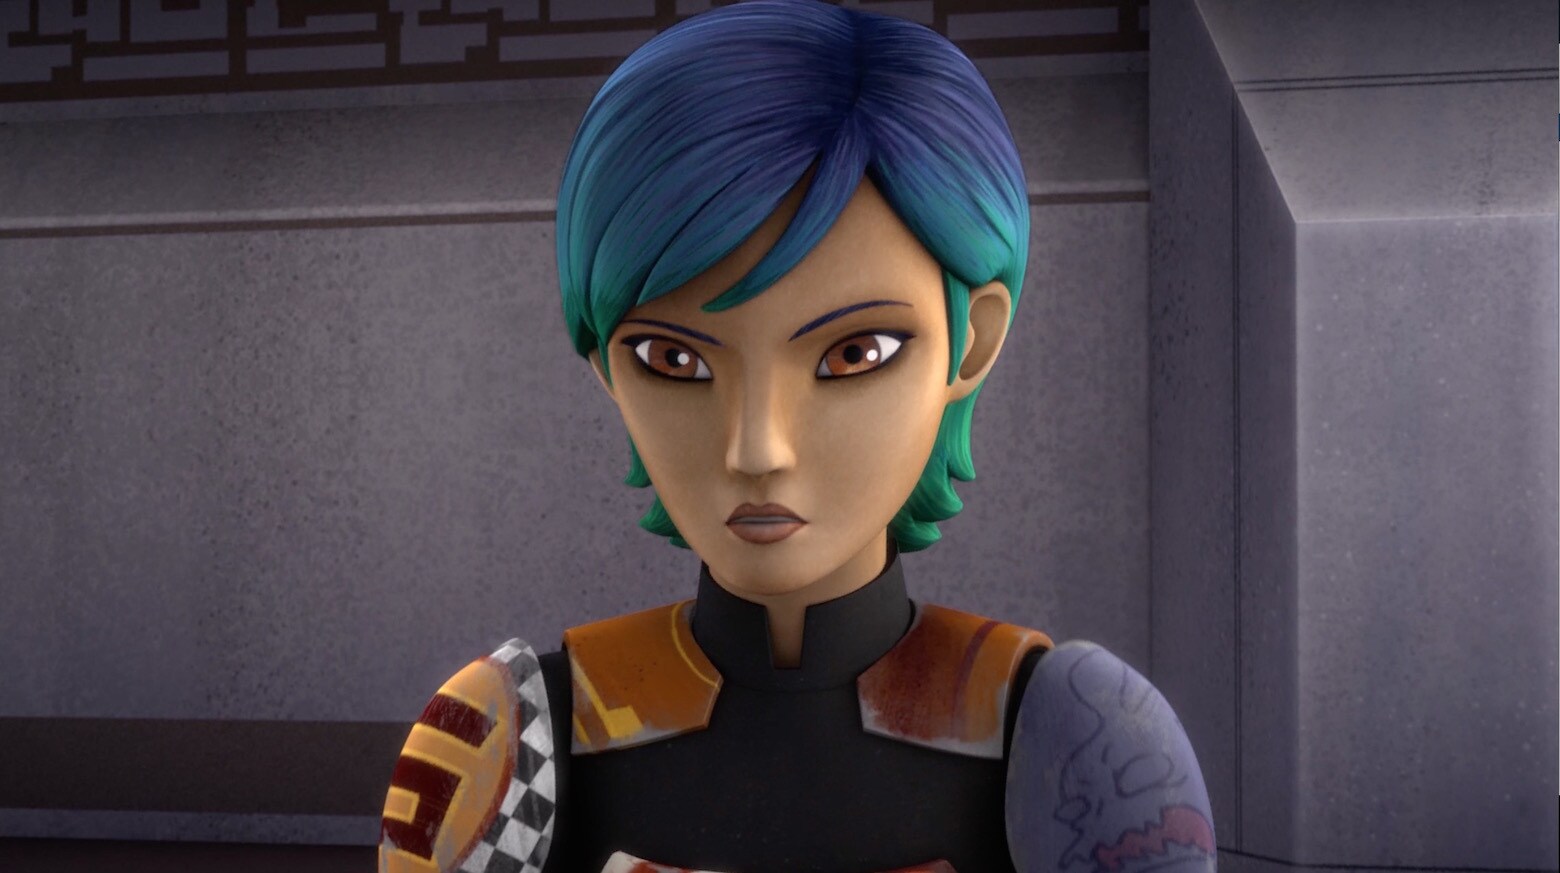 Star Wars Rebels: "Not Alone Anymore"